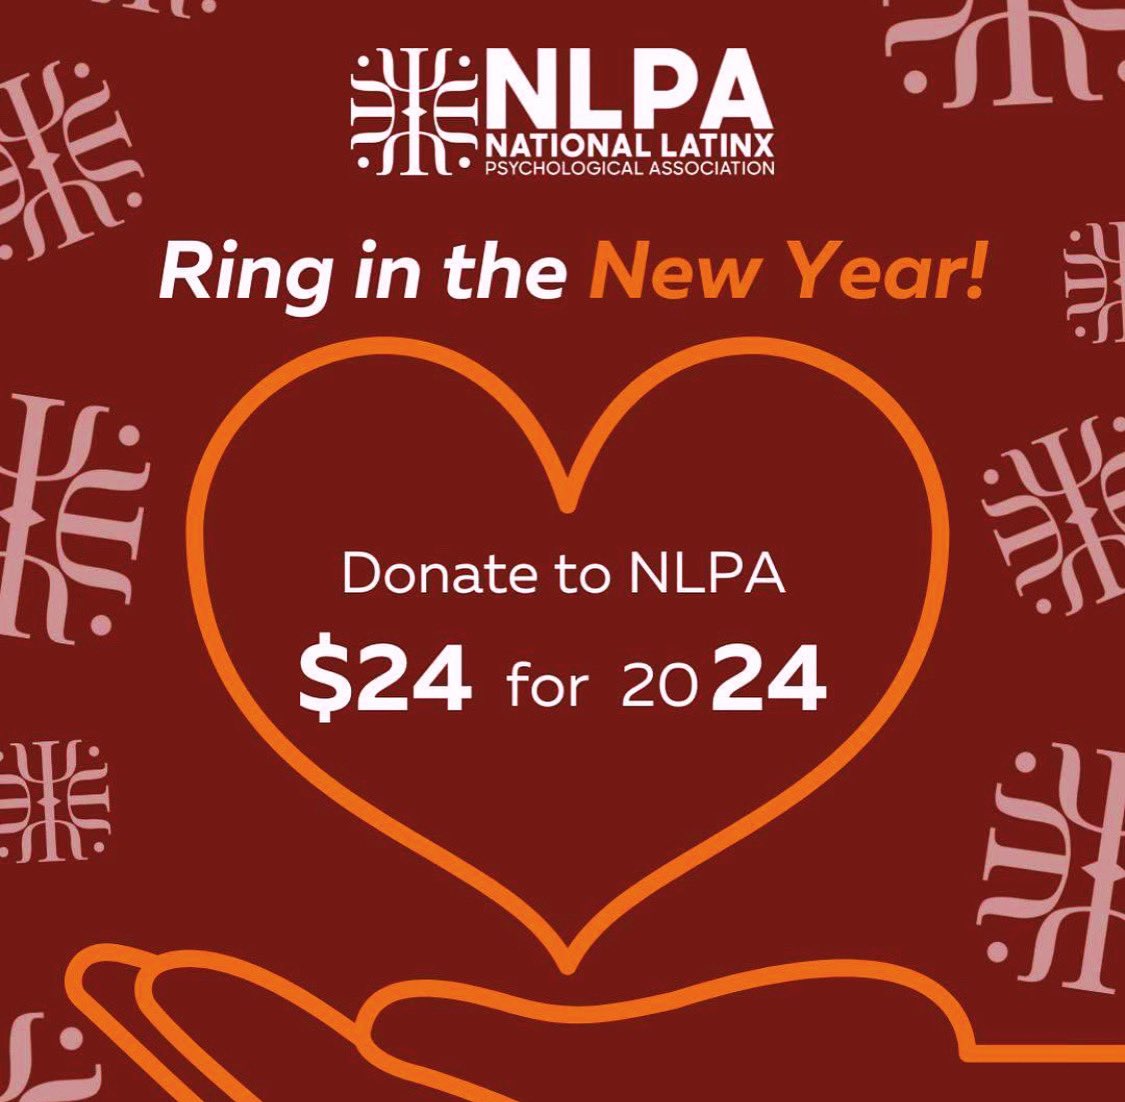 Please help me ring in 2024 with a $24 donation to the National Latinx Psychological Association. @1NLPA is the oldest Latinx Psychology org. Officially incorporated in 2002, it’s roots date back to the 1970’s. Your support WILL make a difference. nlpa.memberclicks.net/ring-in-the-ne…